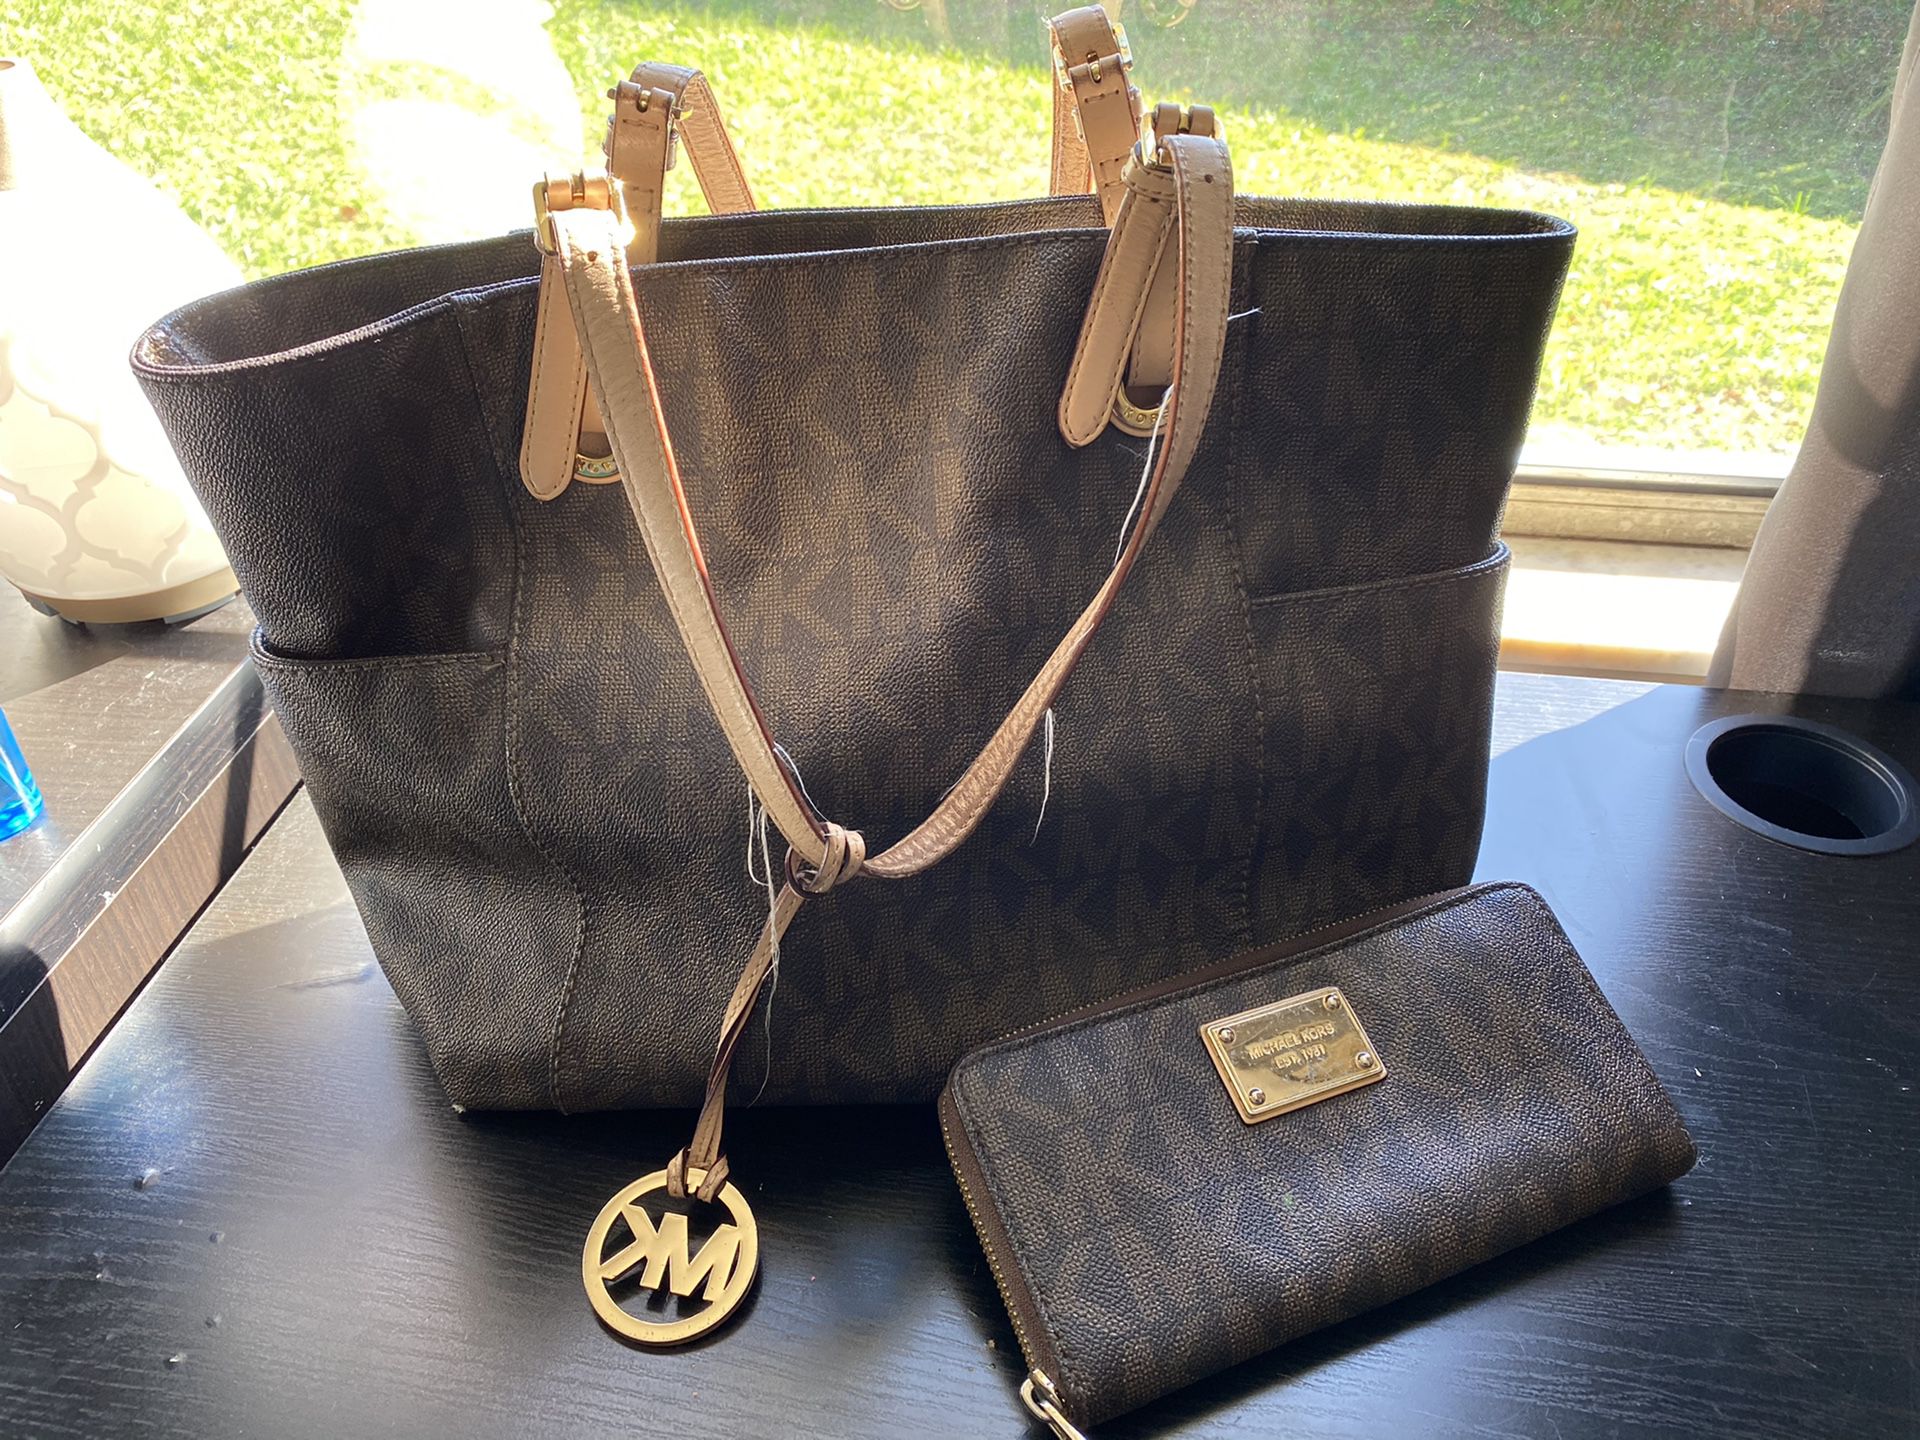 Michael Kors purse and matching wallet